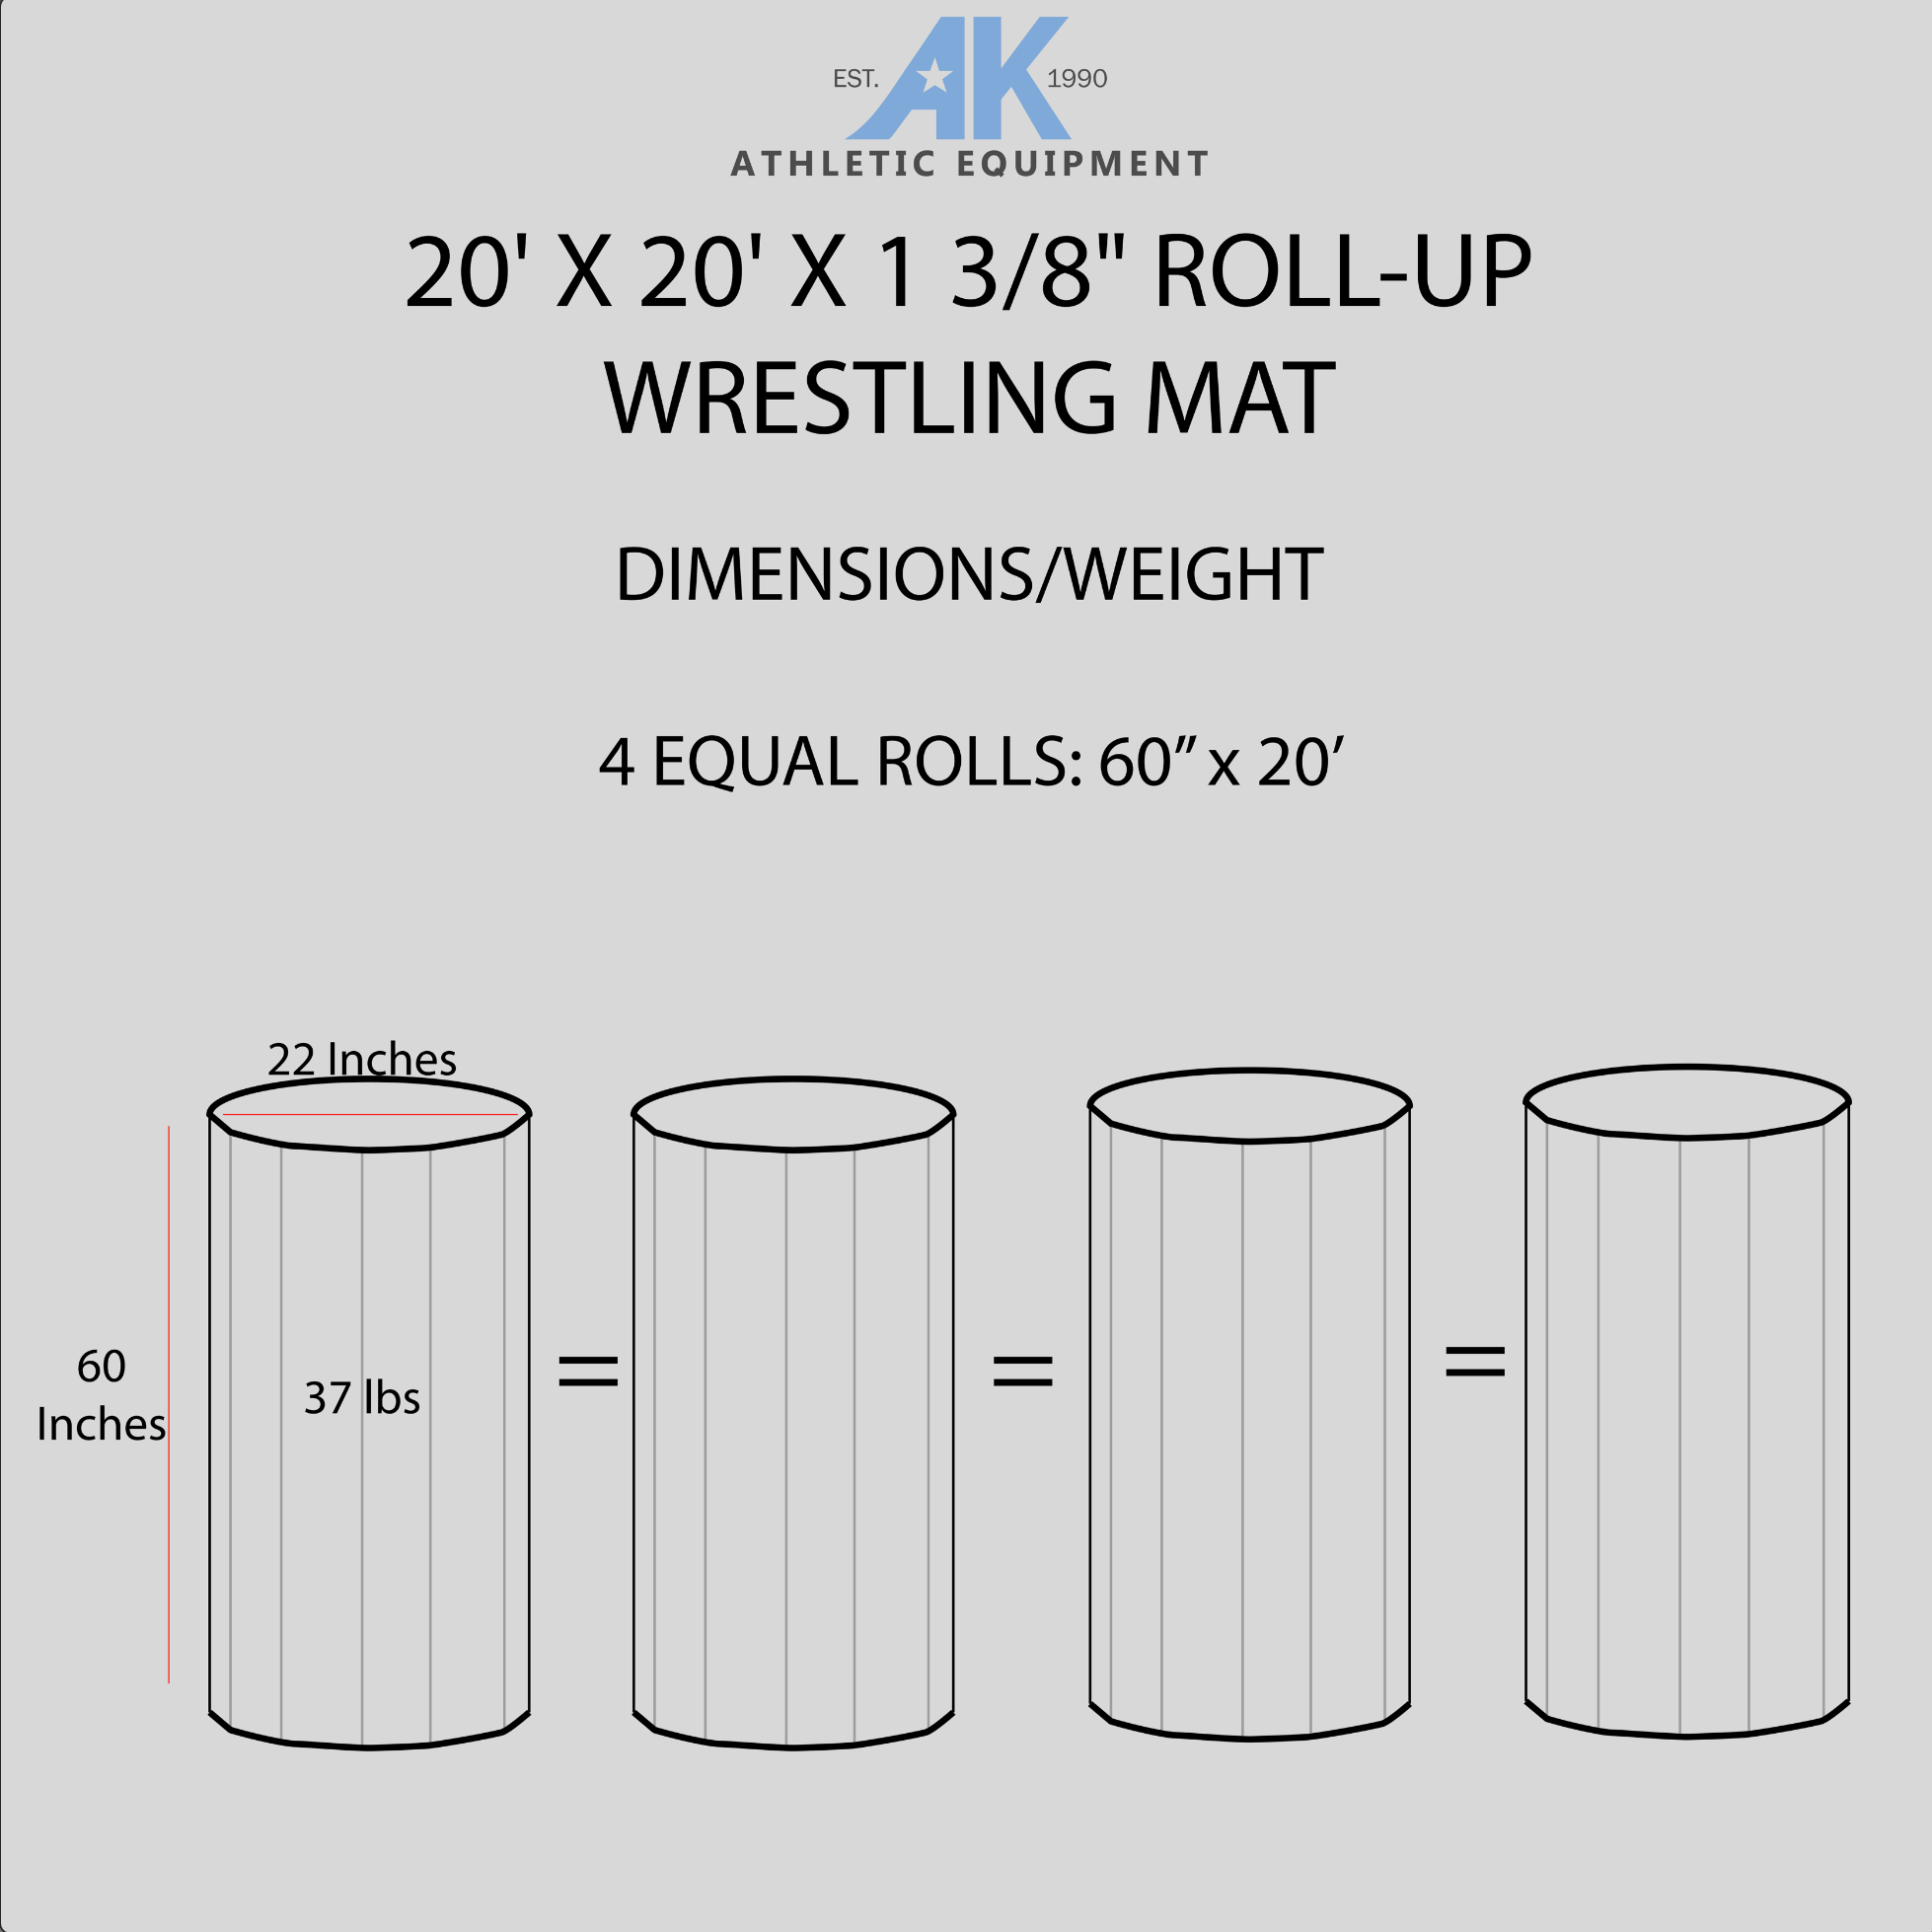 Mat sizes for storing wrestling mats. Mats can be used for training, personal fitness, high school/collegiate competition and police programs. 